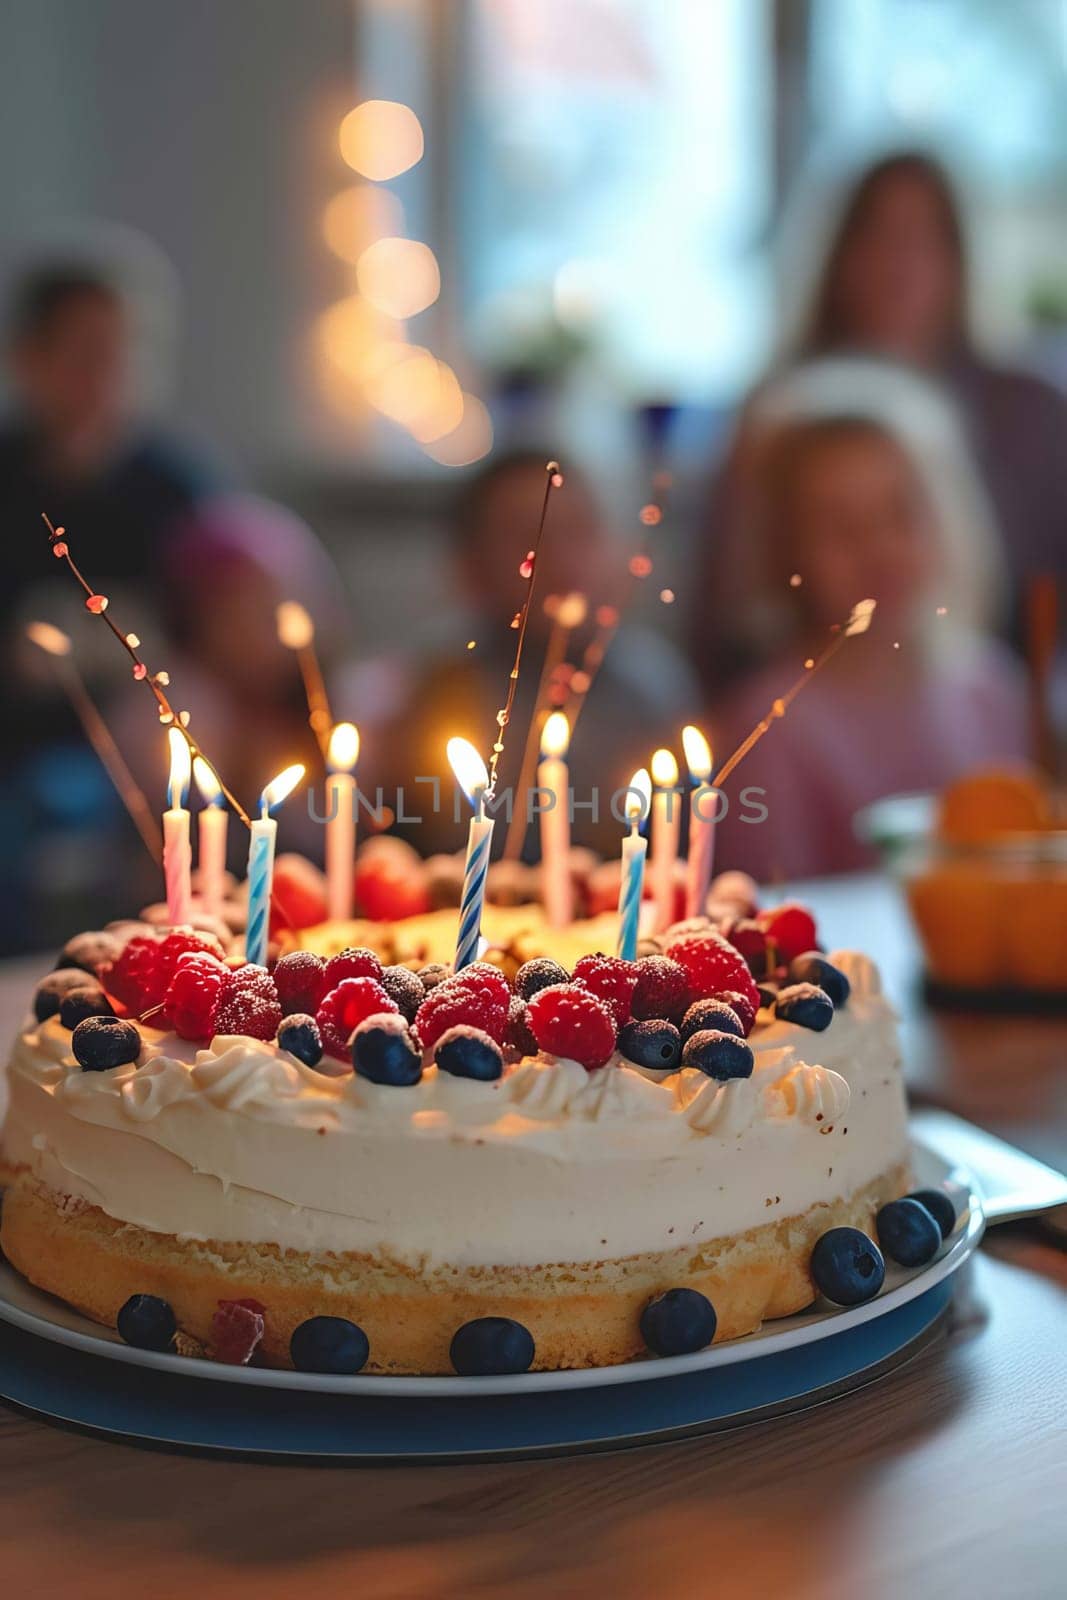 birthday cake and children. Selective focus. by mila1784